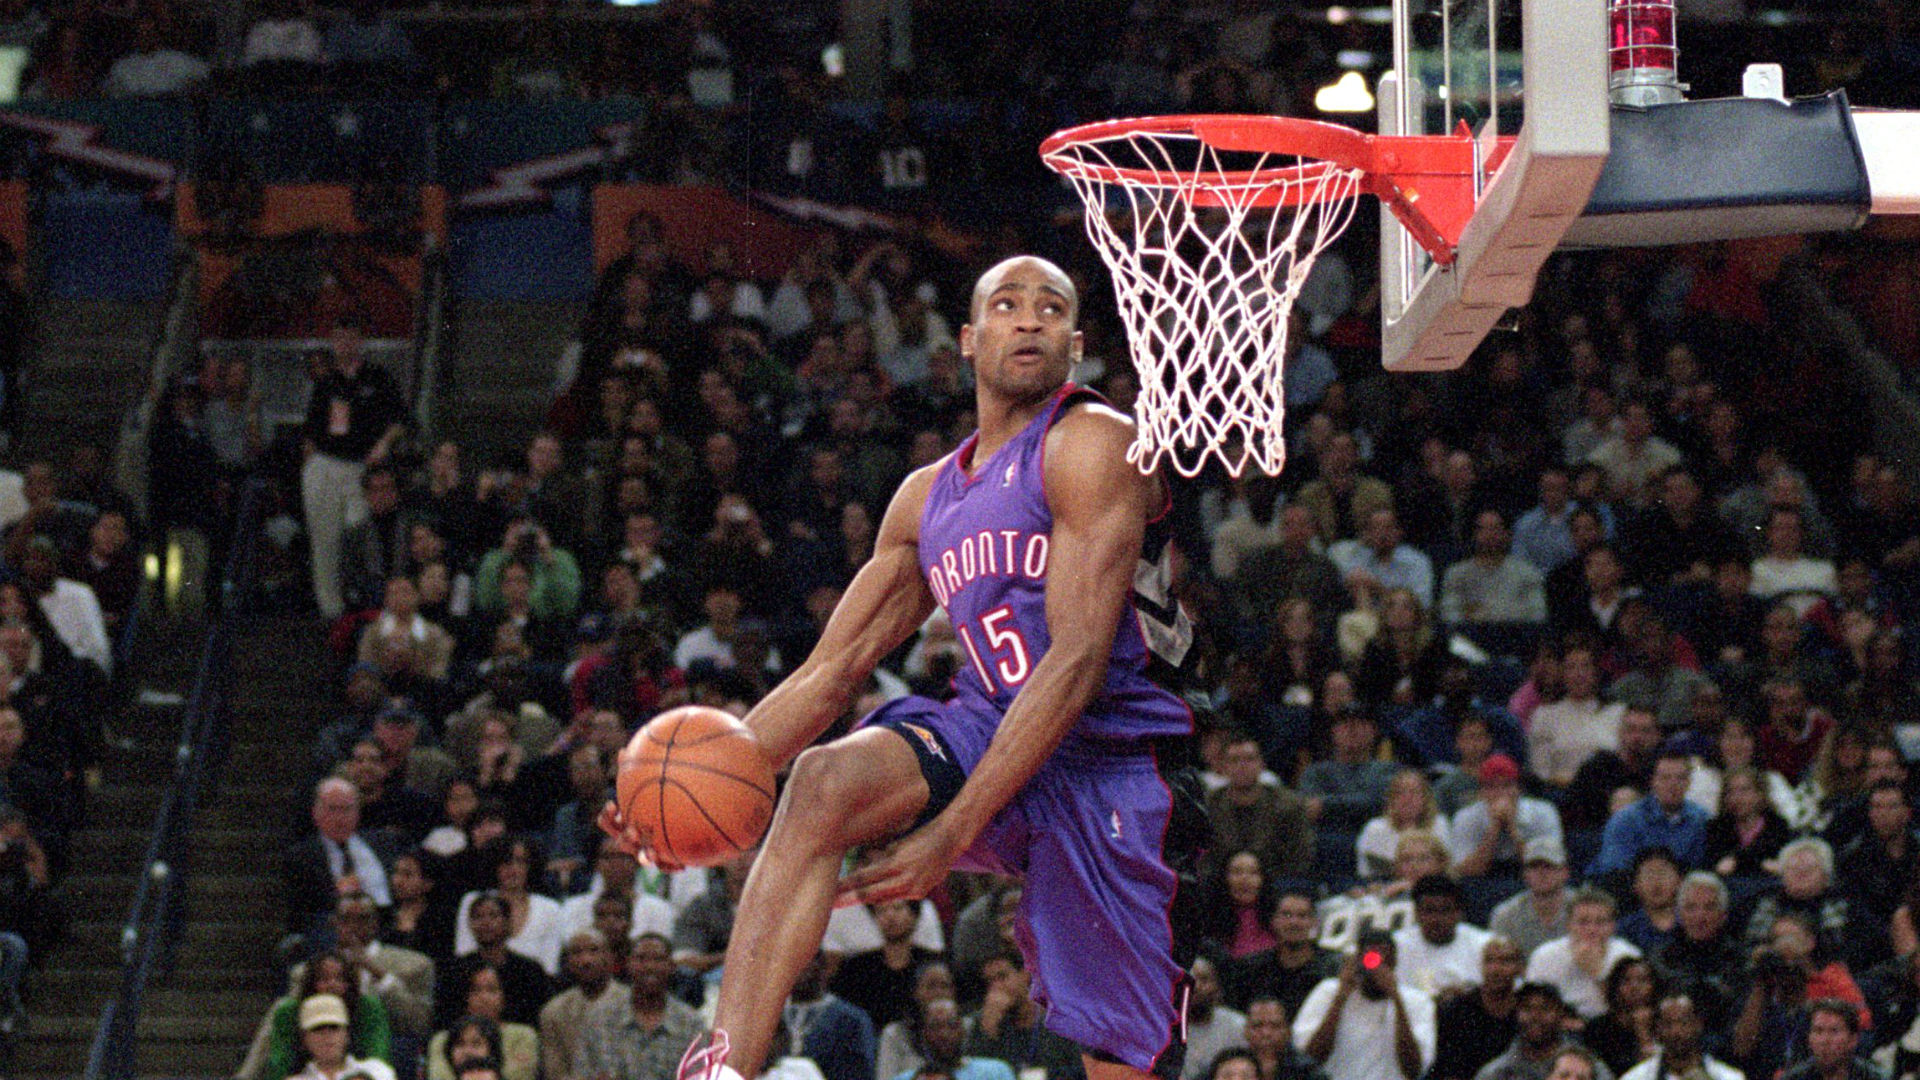 1920x1080 How Would You Rank the Best Jams in NBA Slam Dunk Contest History? |  Playbuzz